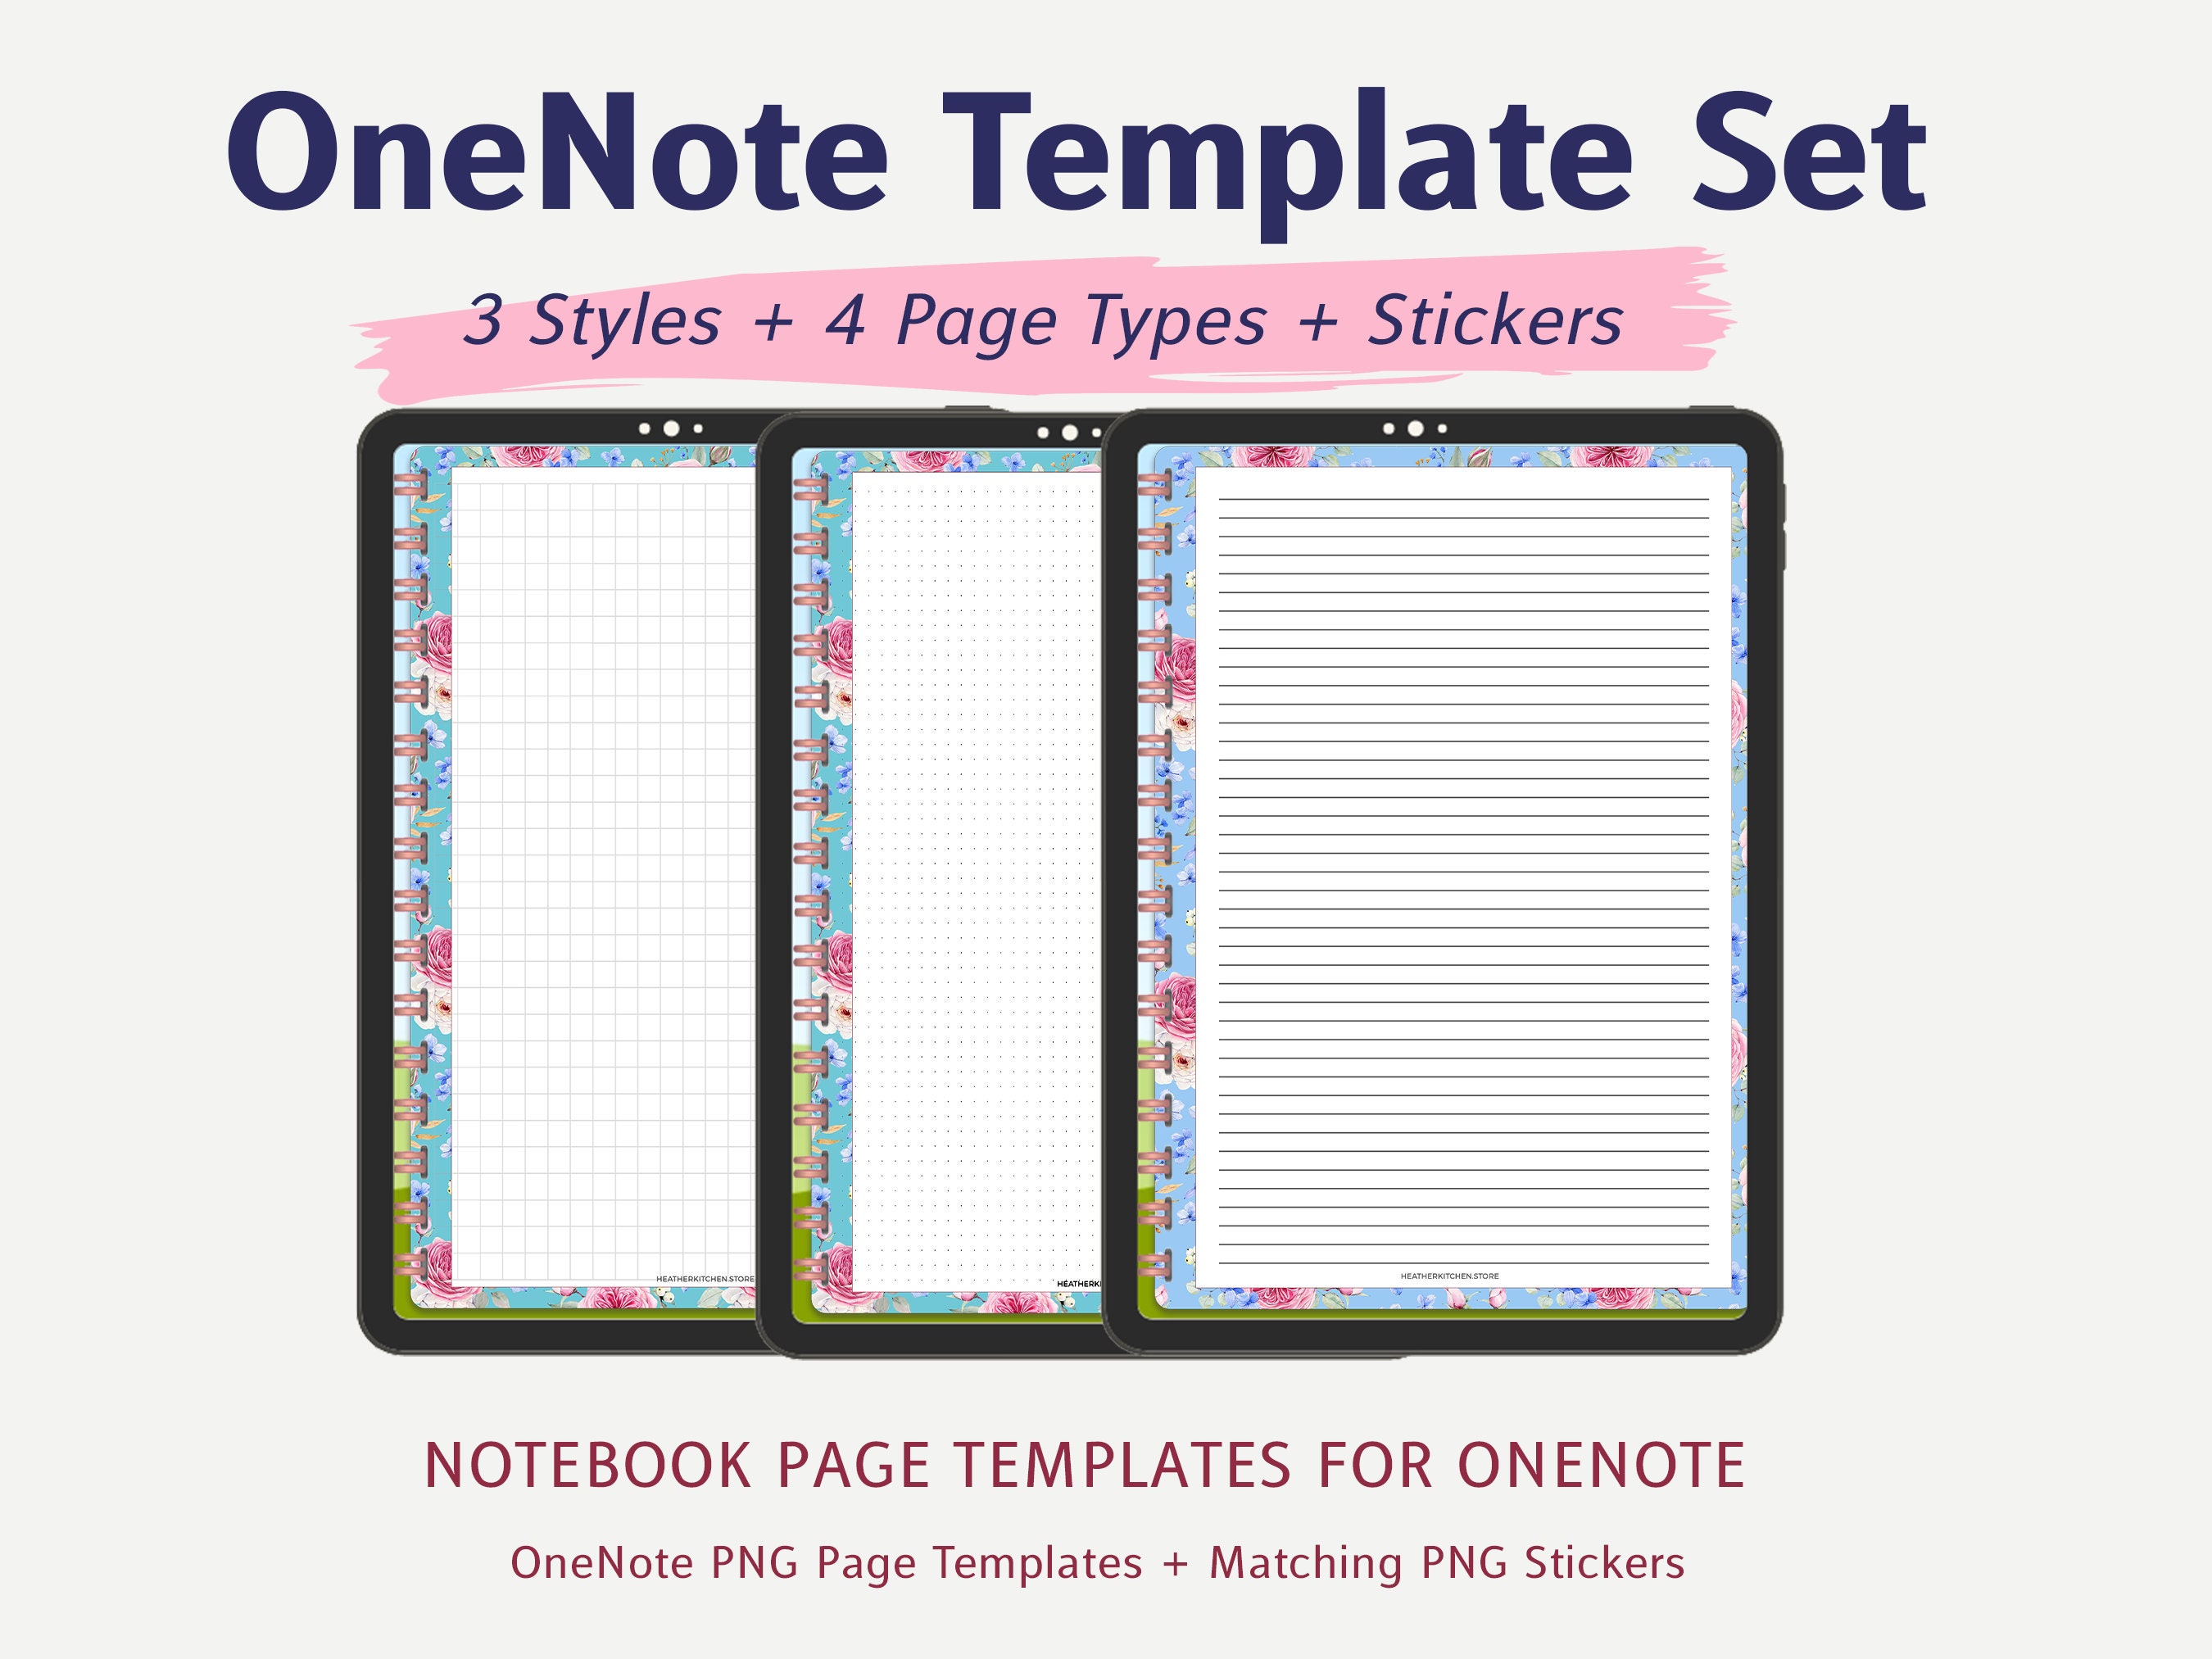 onenote-templates-set-png-stickers-digital-notebook-etsy